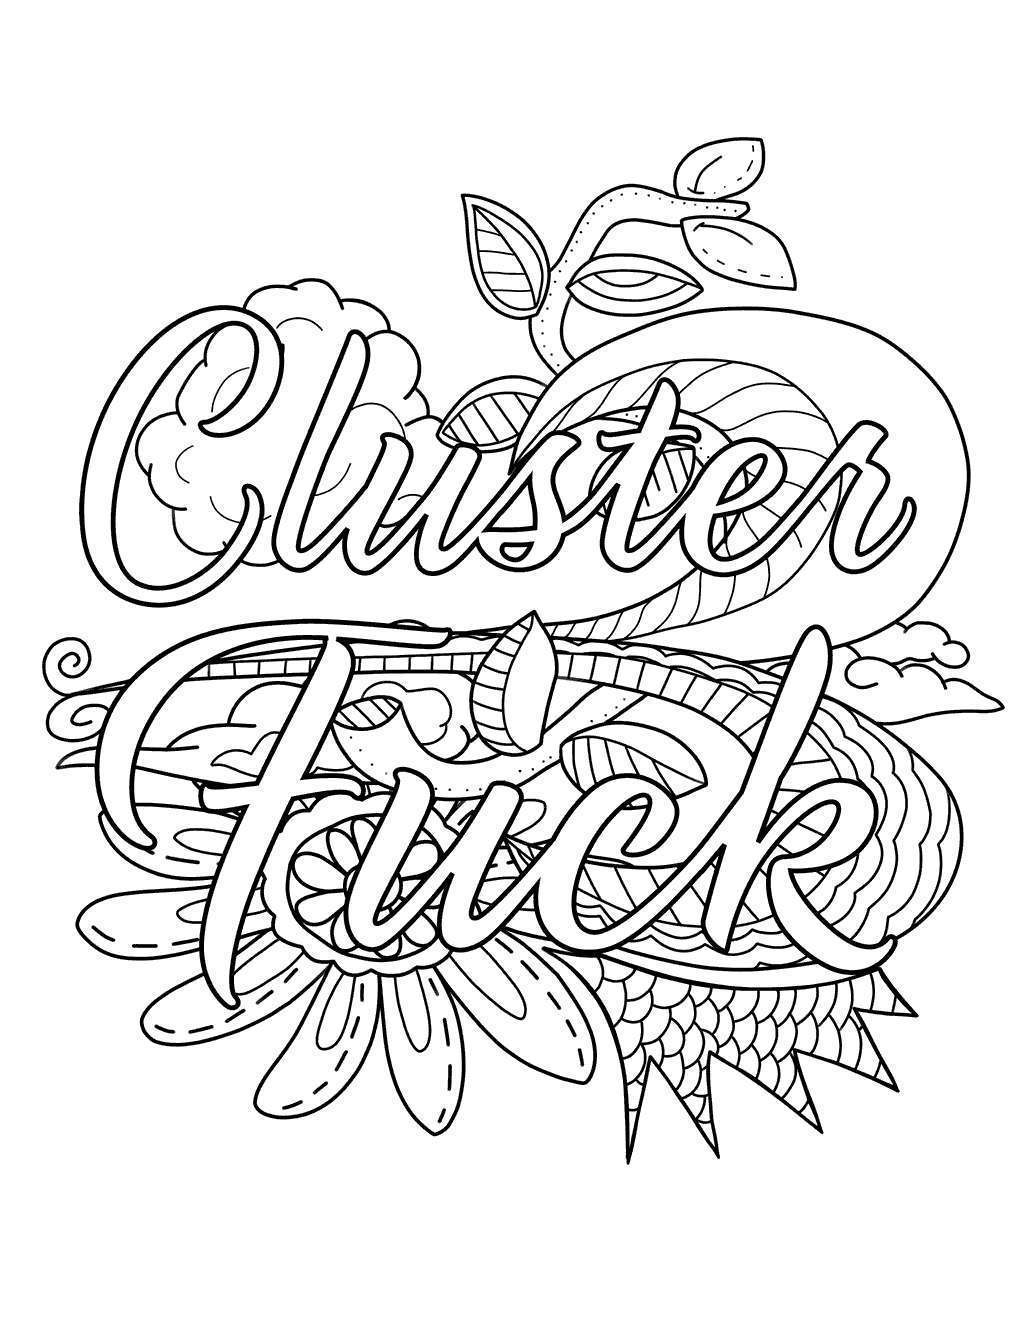 Free Cuss Word Coloring Pages Cluster Fuck printable